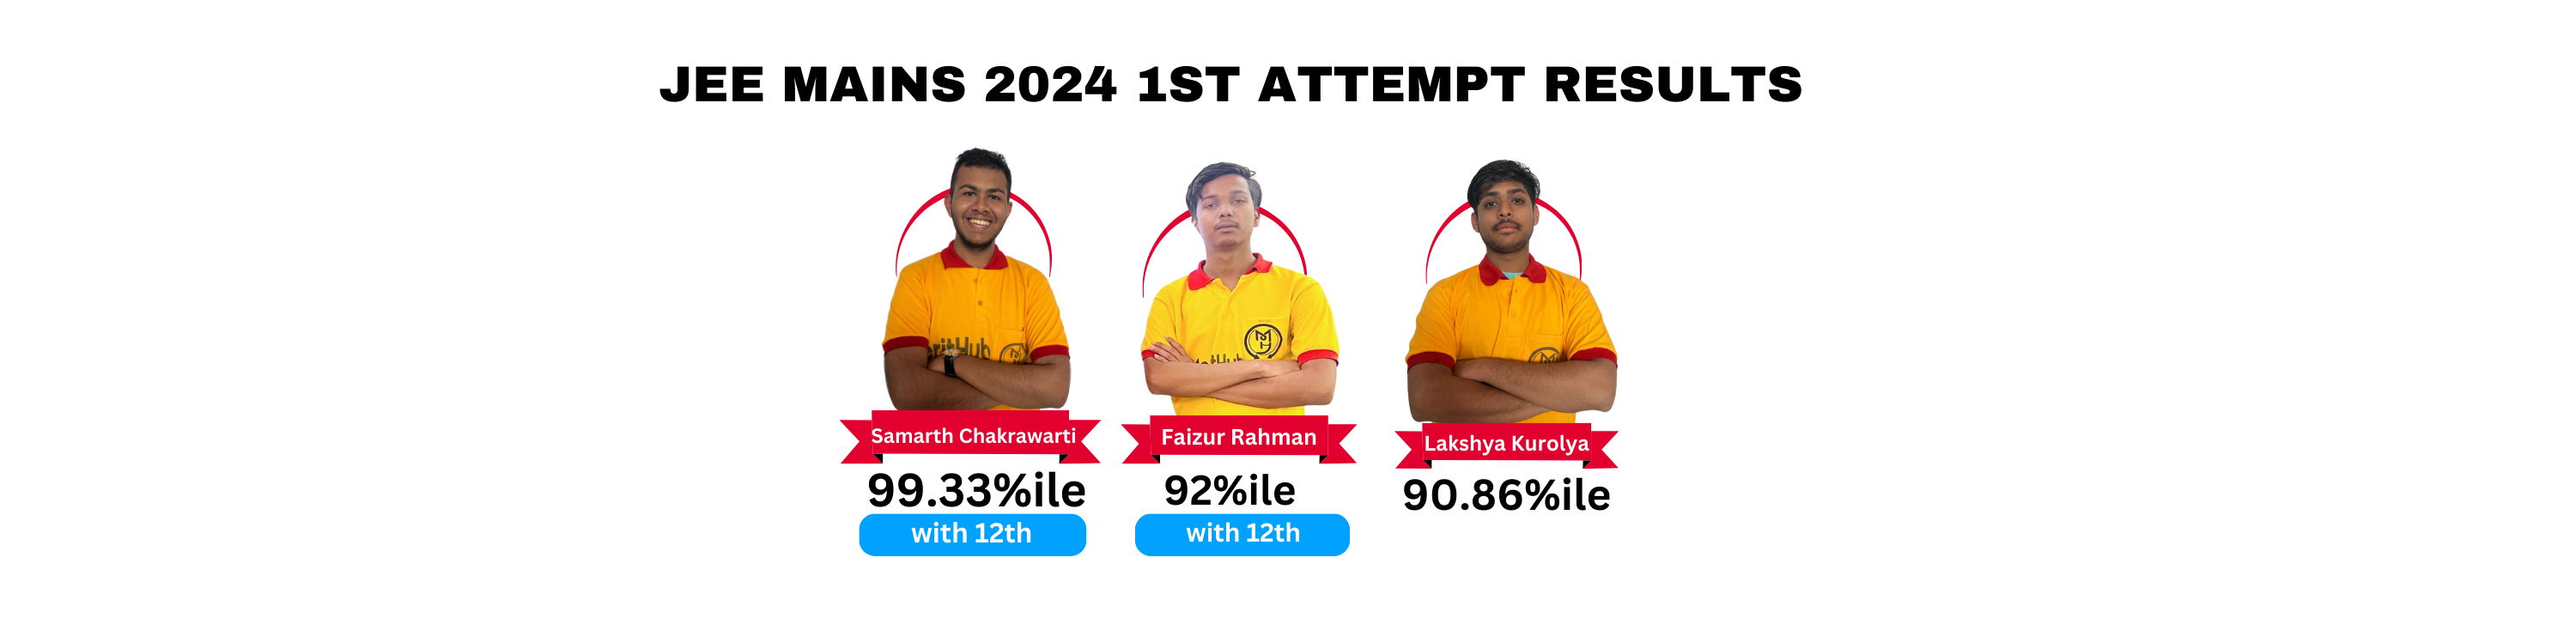 jee mains 2024 result